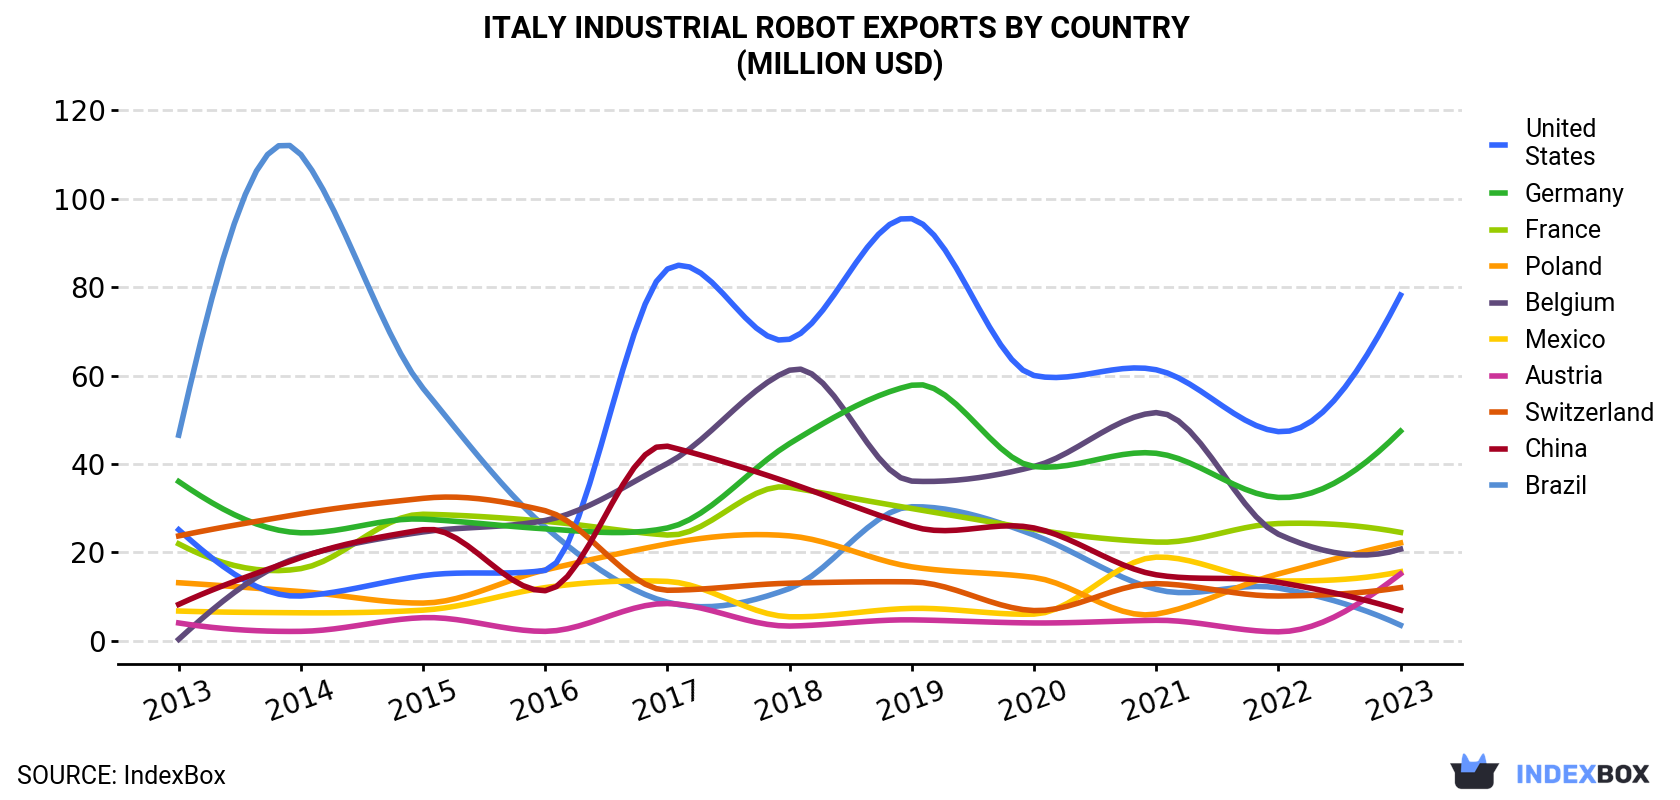 Italy Industrial Robot Exports By Country (Million USD)